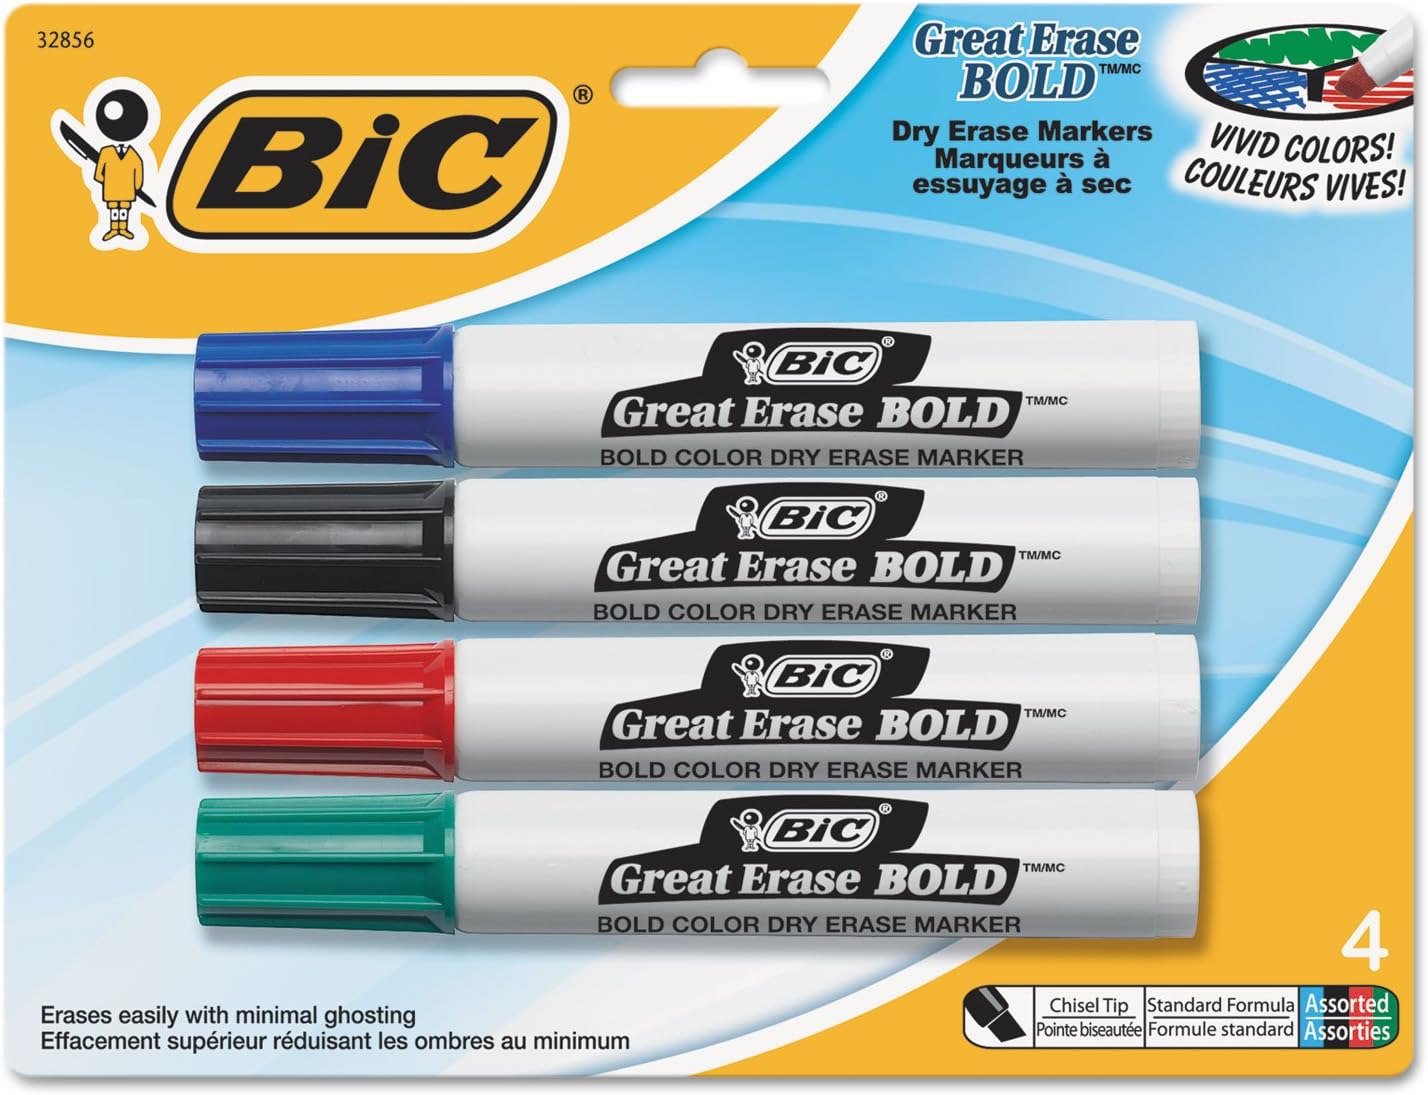 BIC Great Erase BOLD Dry Erase Marker, Tank Style, Chisel Tip, Assorted Colors, 4-Count 